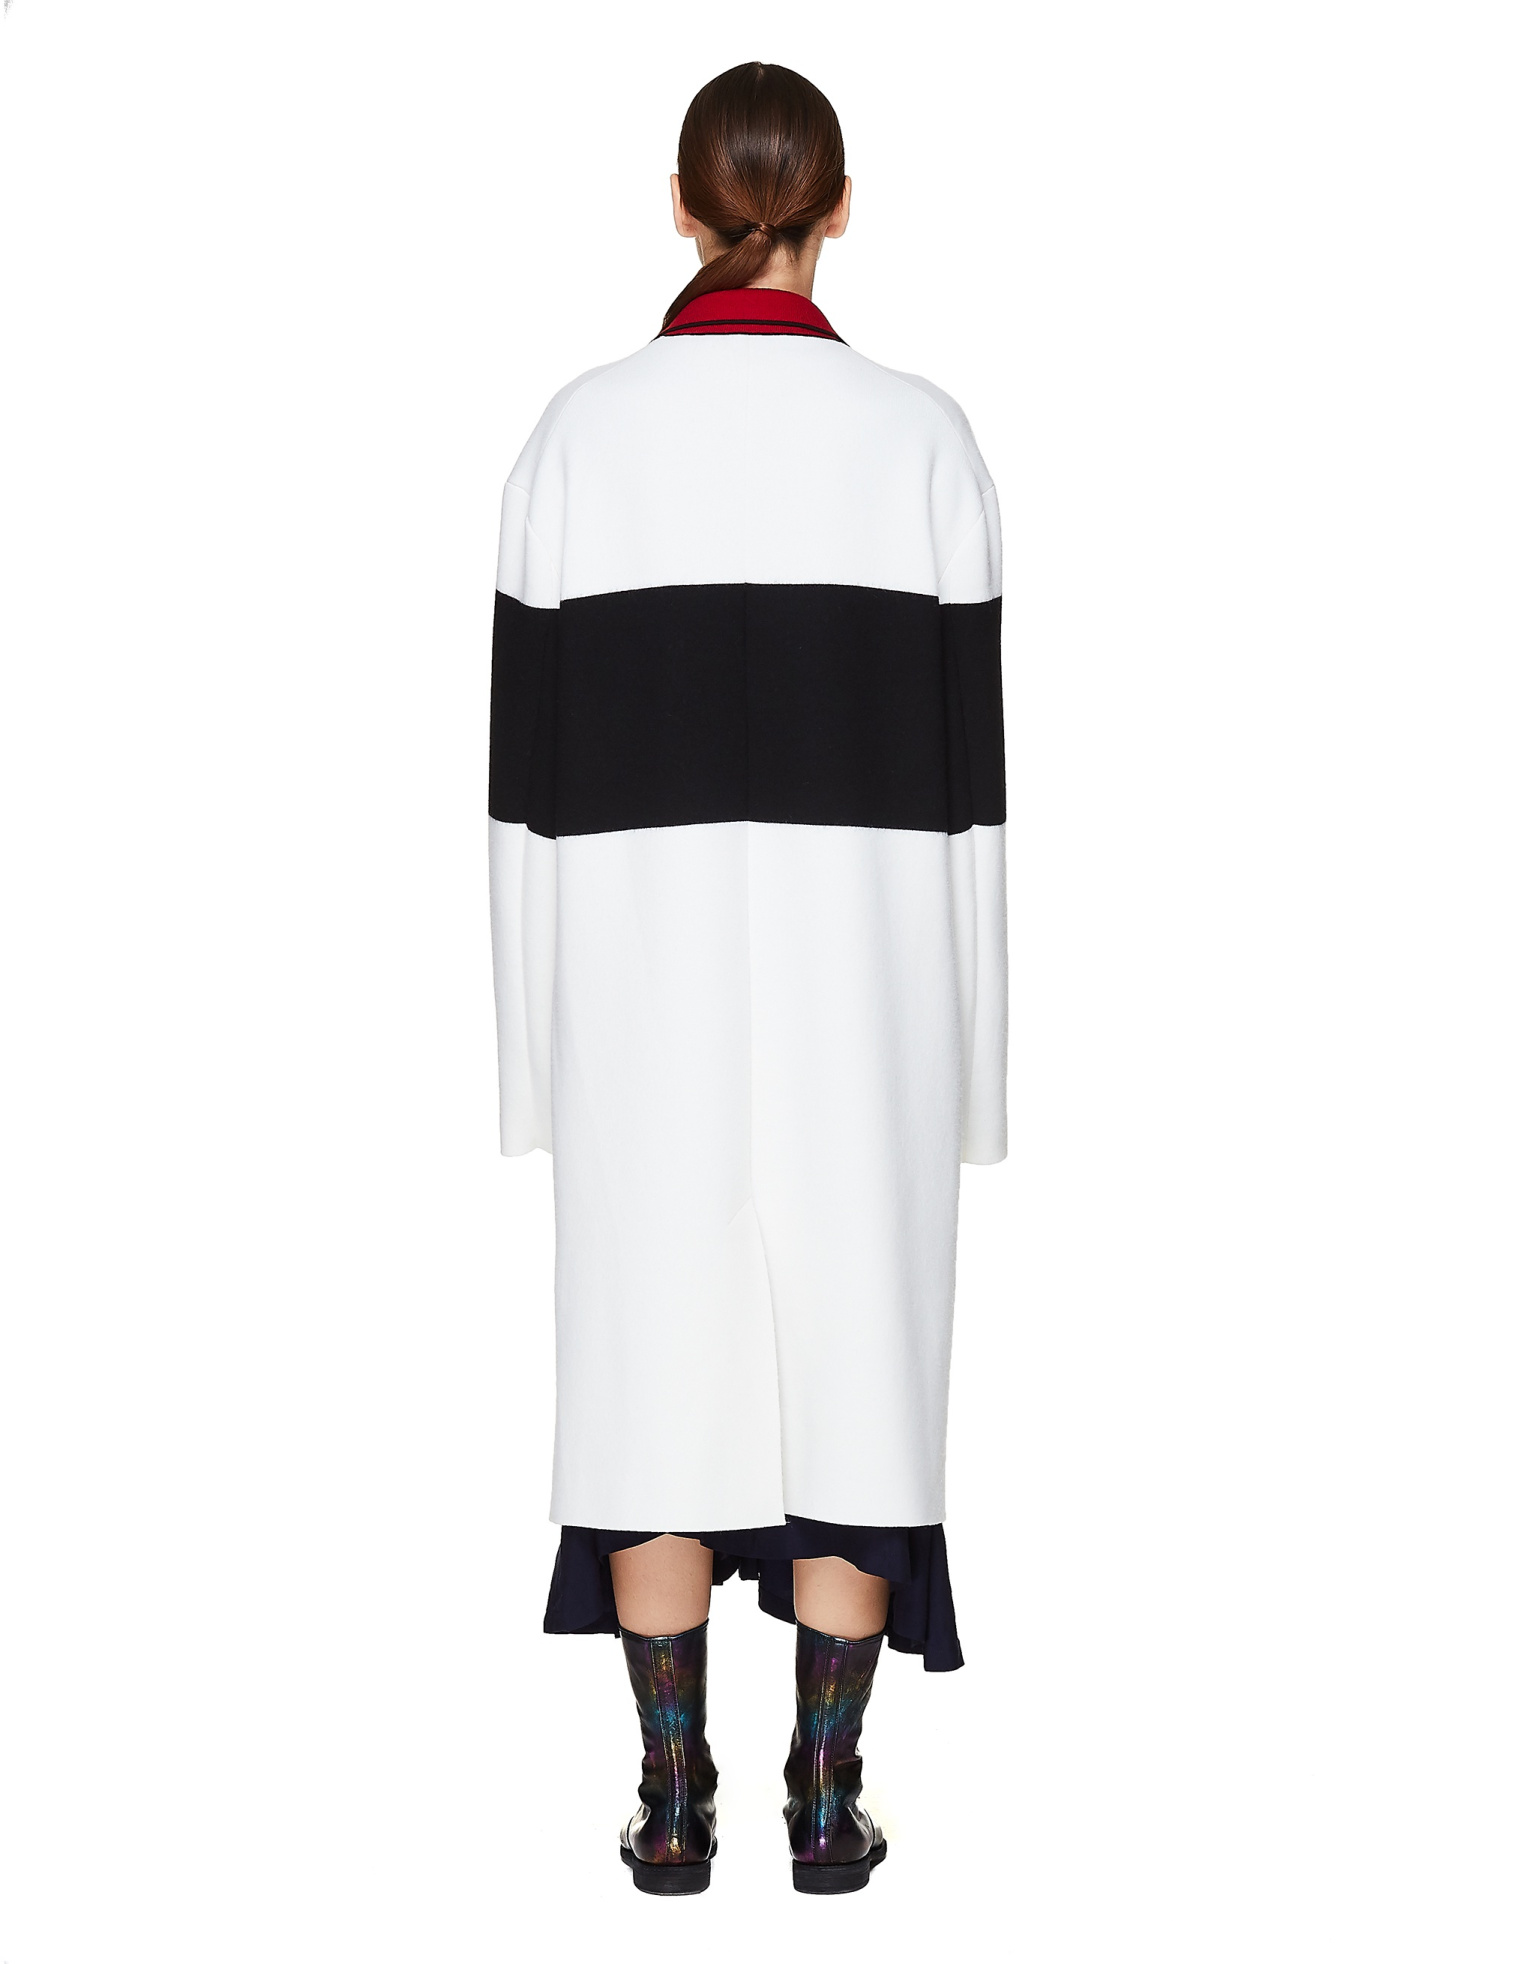 Haider Ackermann Multicolor Wool Knitted Coat